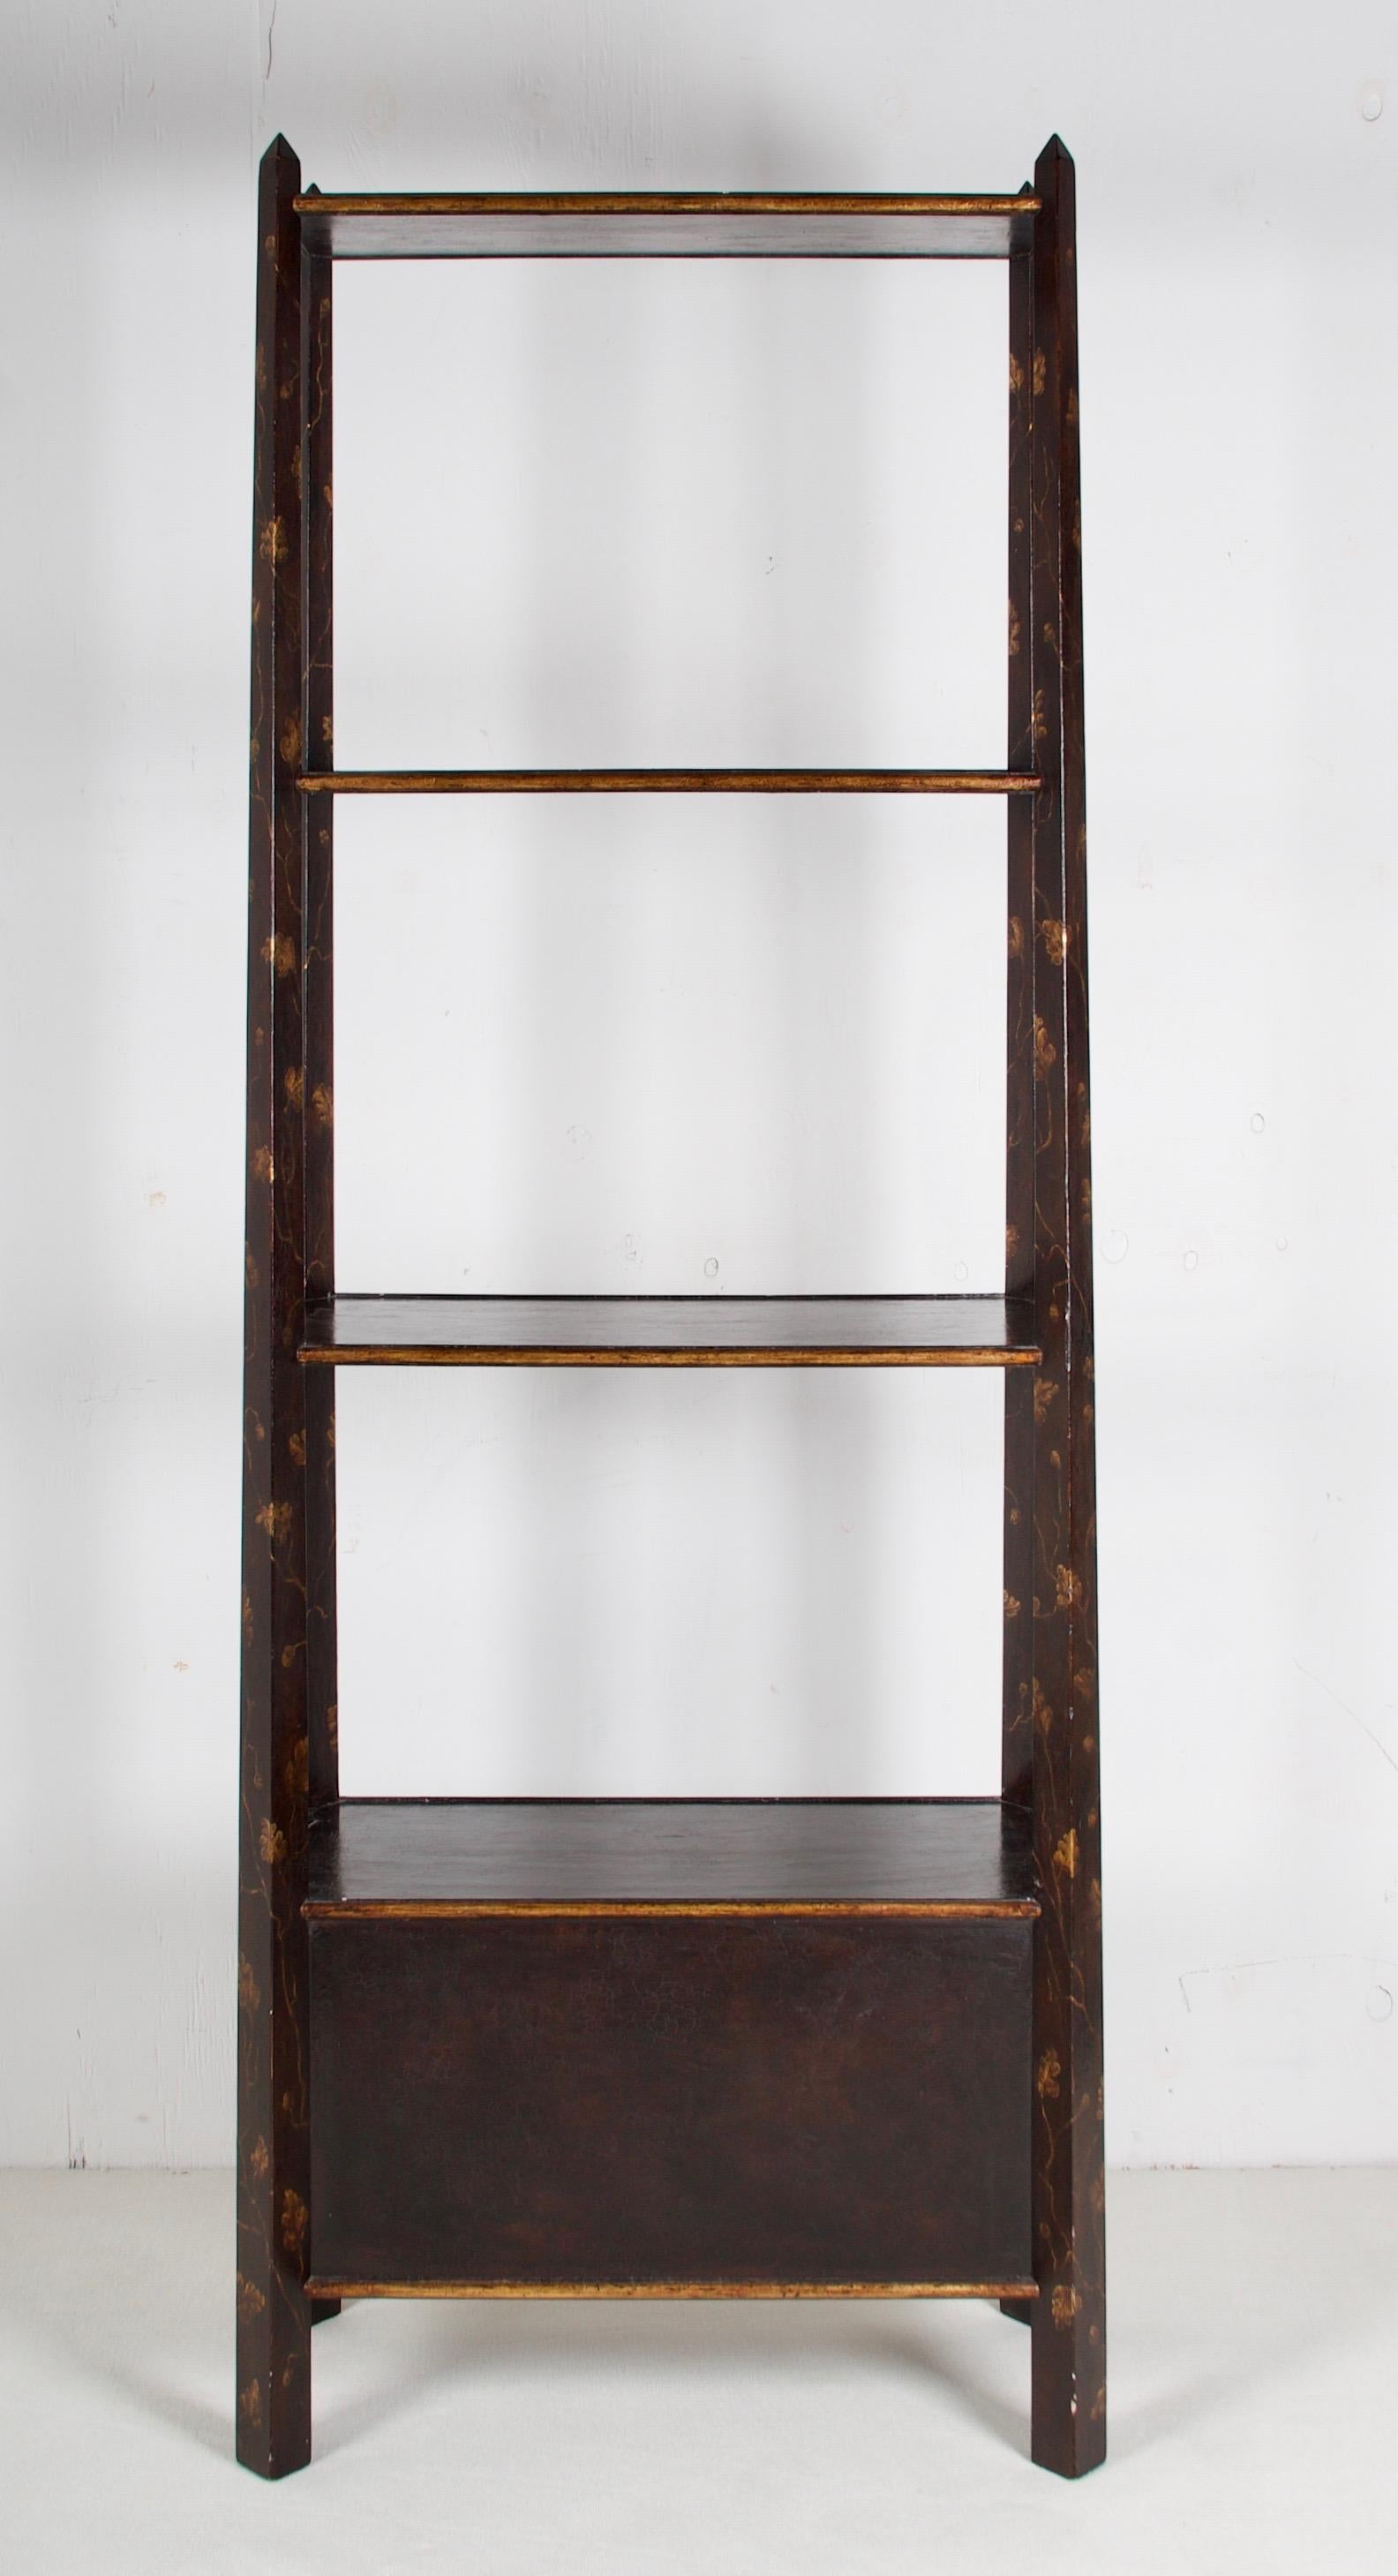 British Colonial Bookcase/Etagere, by Rose Tarlow, chinoiserie decor.